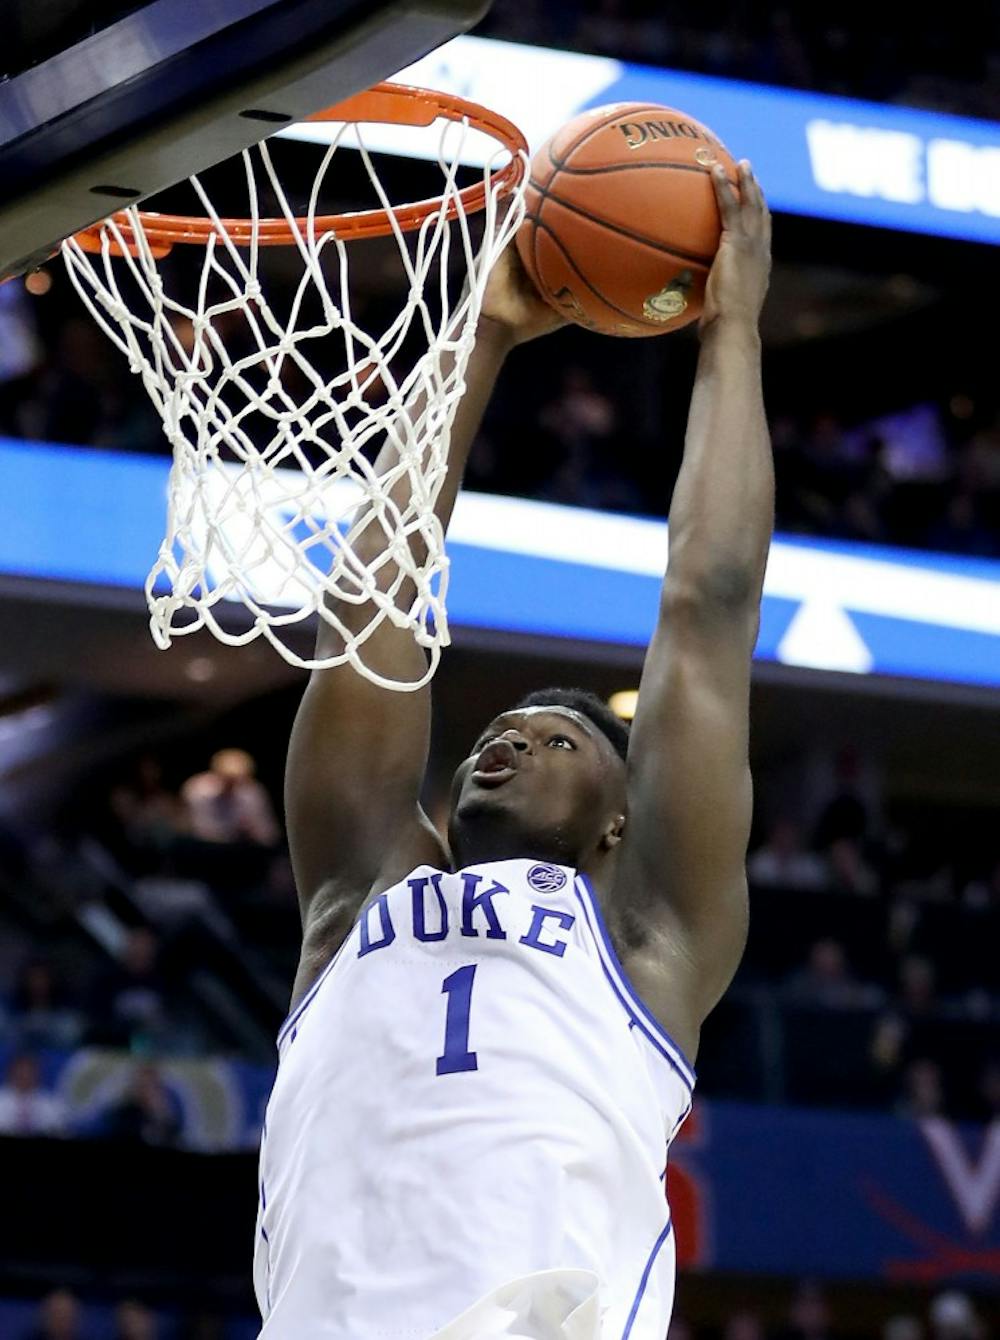 Duke's Zion Williamson dunks against he Florida State Seminoles during the championship game of the ACC Tournament at Spectrum Center in Charlotte, N.C., on Saturday, March 16, 2019. Duke won, 73-63. **FOR USE WITH THIS STORY ONLY** (Streeter Lecka/Getty Images/TNS)